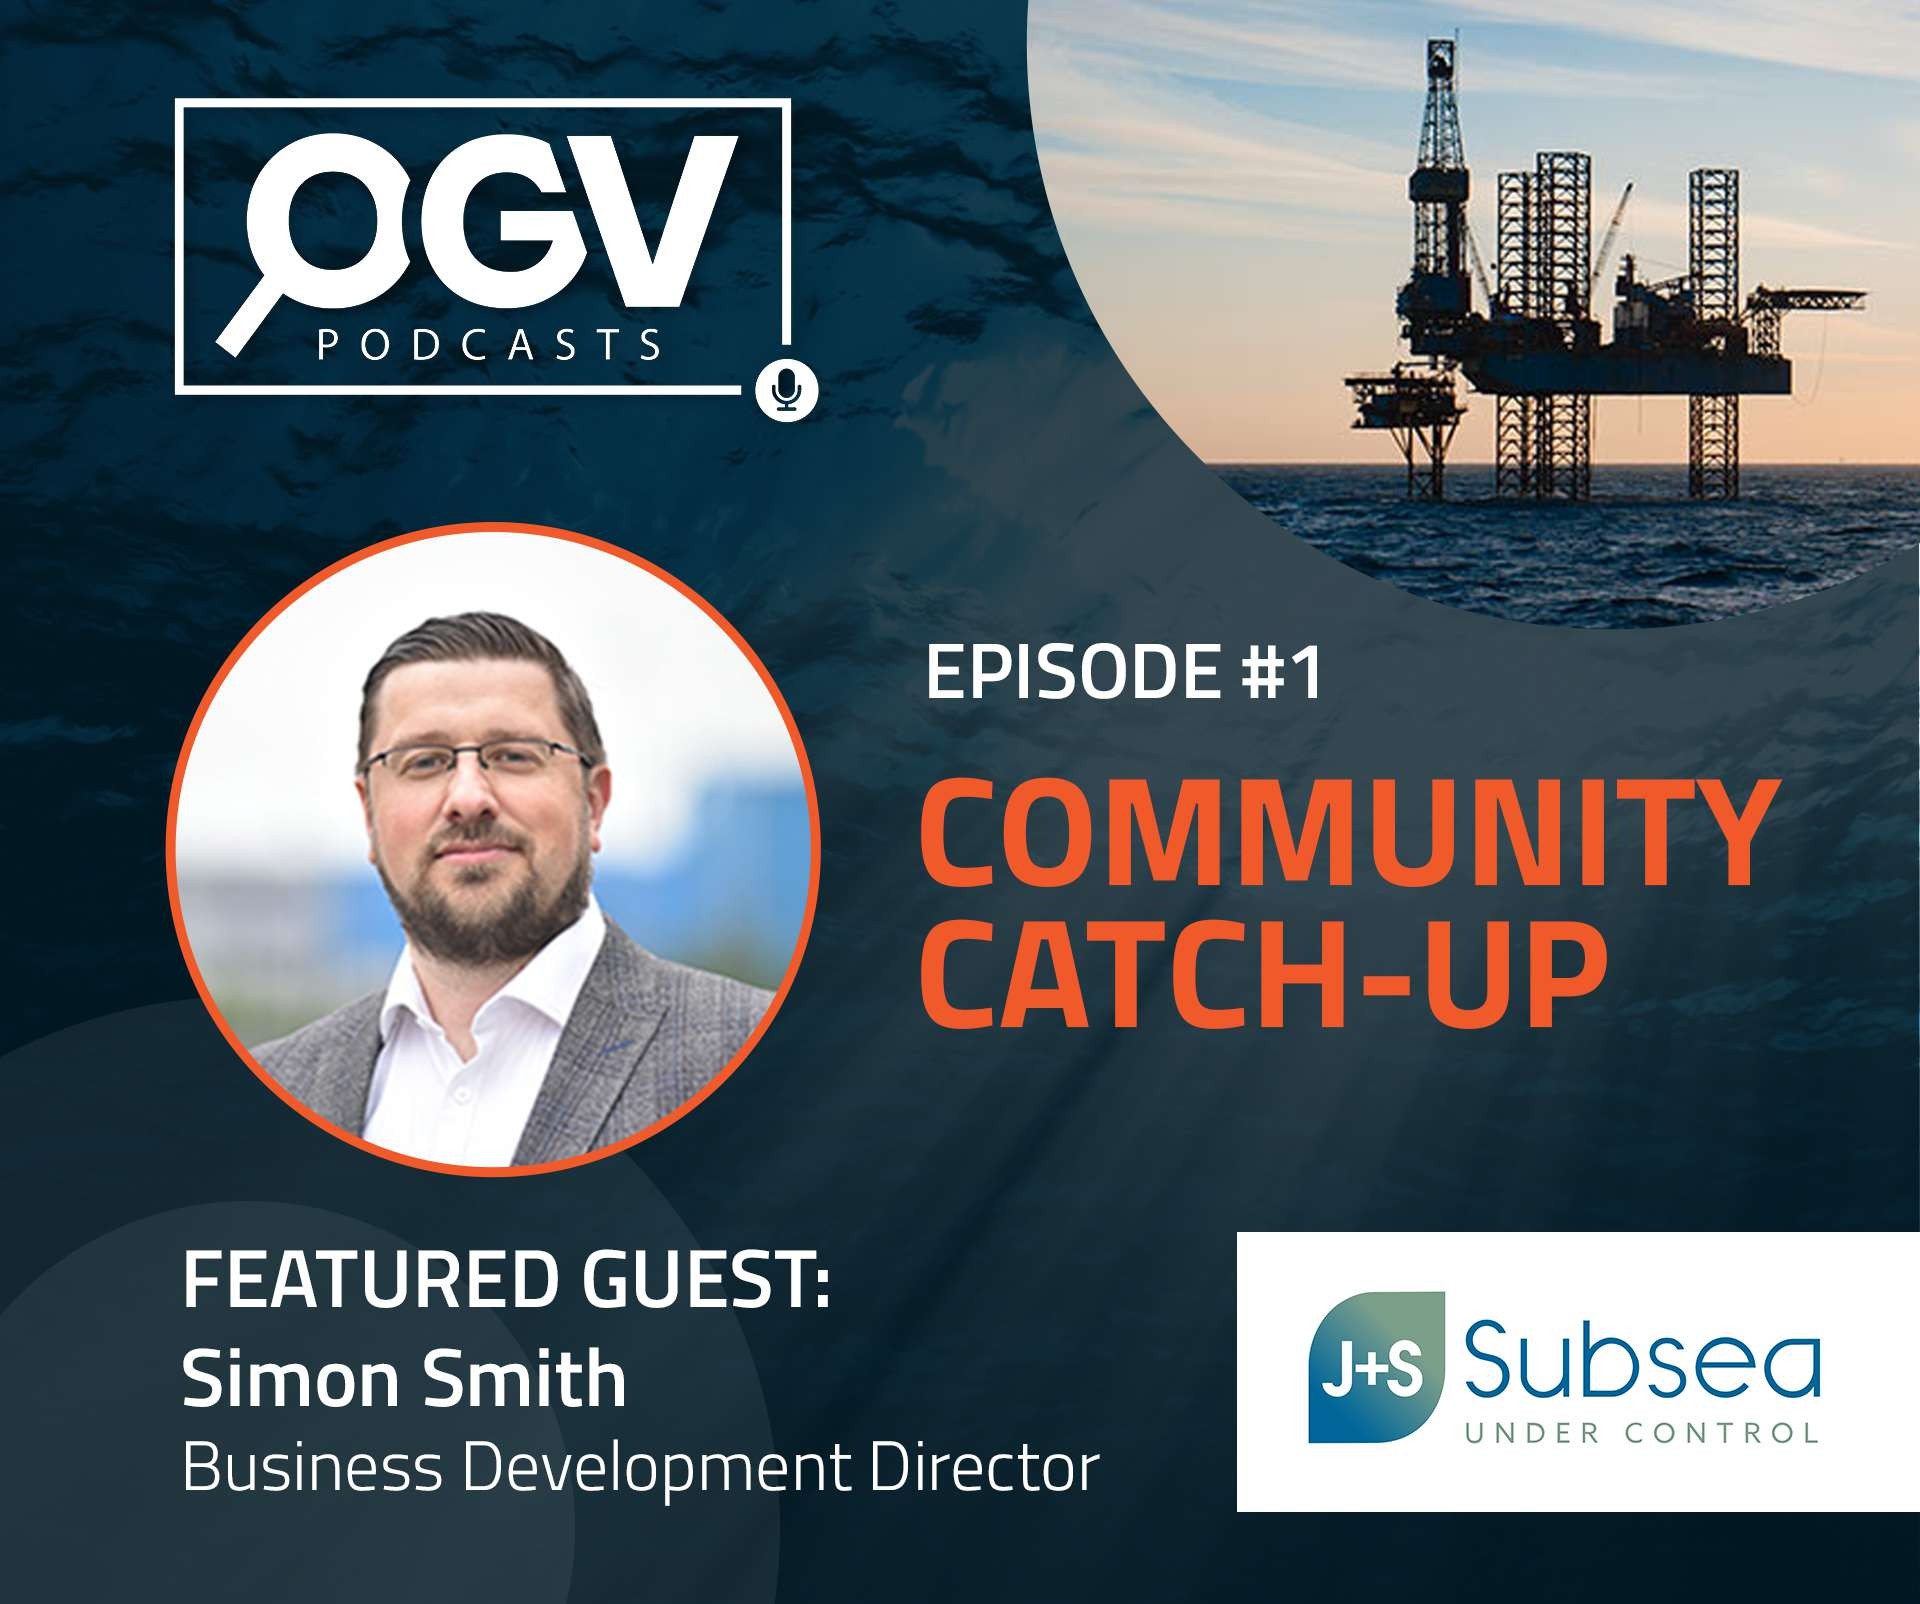 OGV Community Catch-up with Simon Smith from J+S Subsea